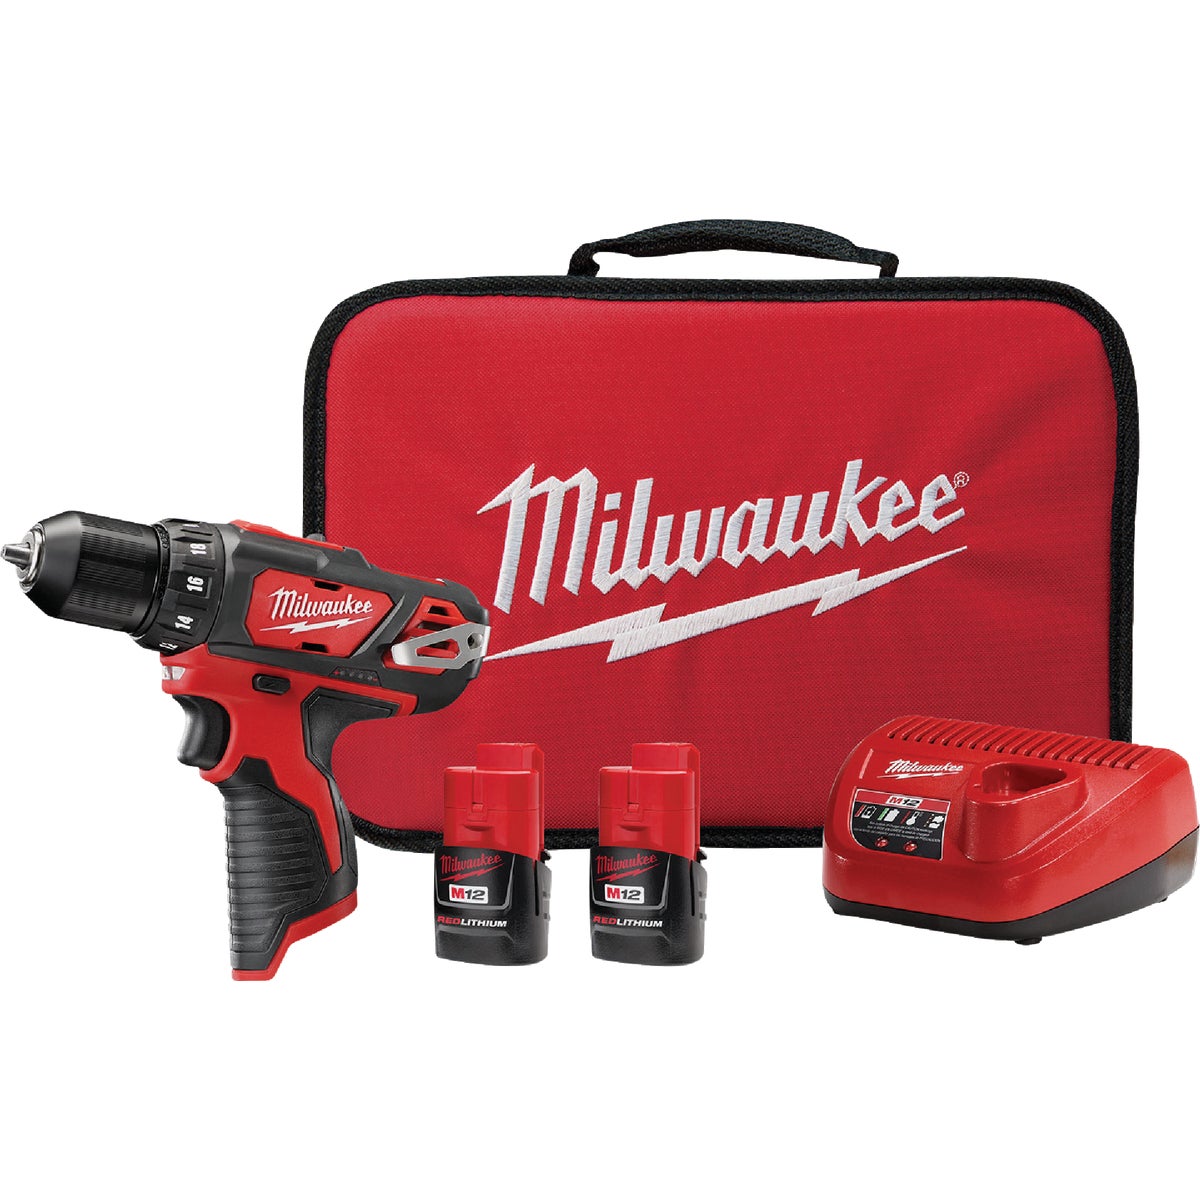 Milwaukee M12 3/8 In. Cordless Drill/Driver Kit